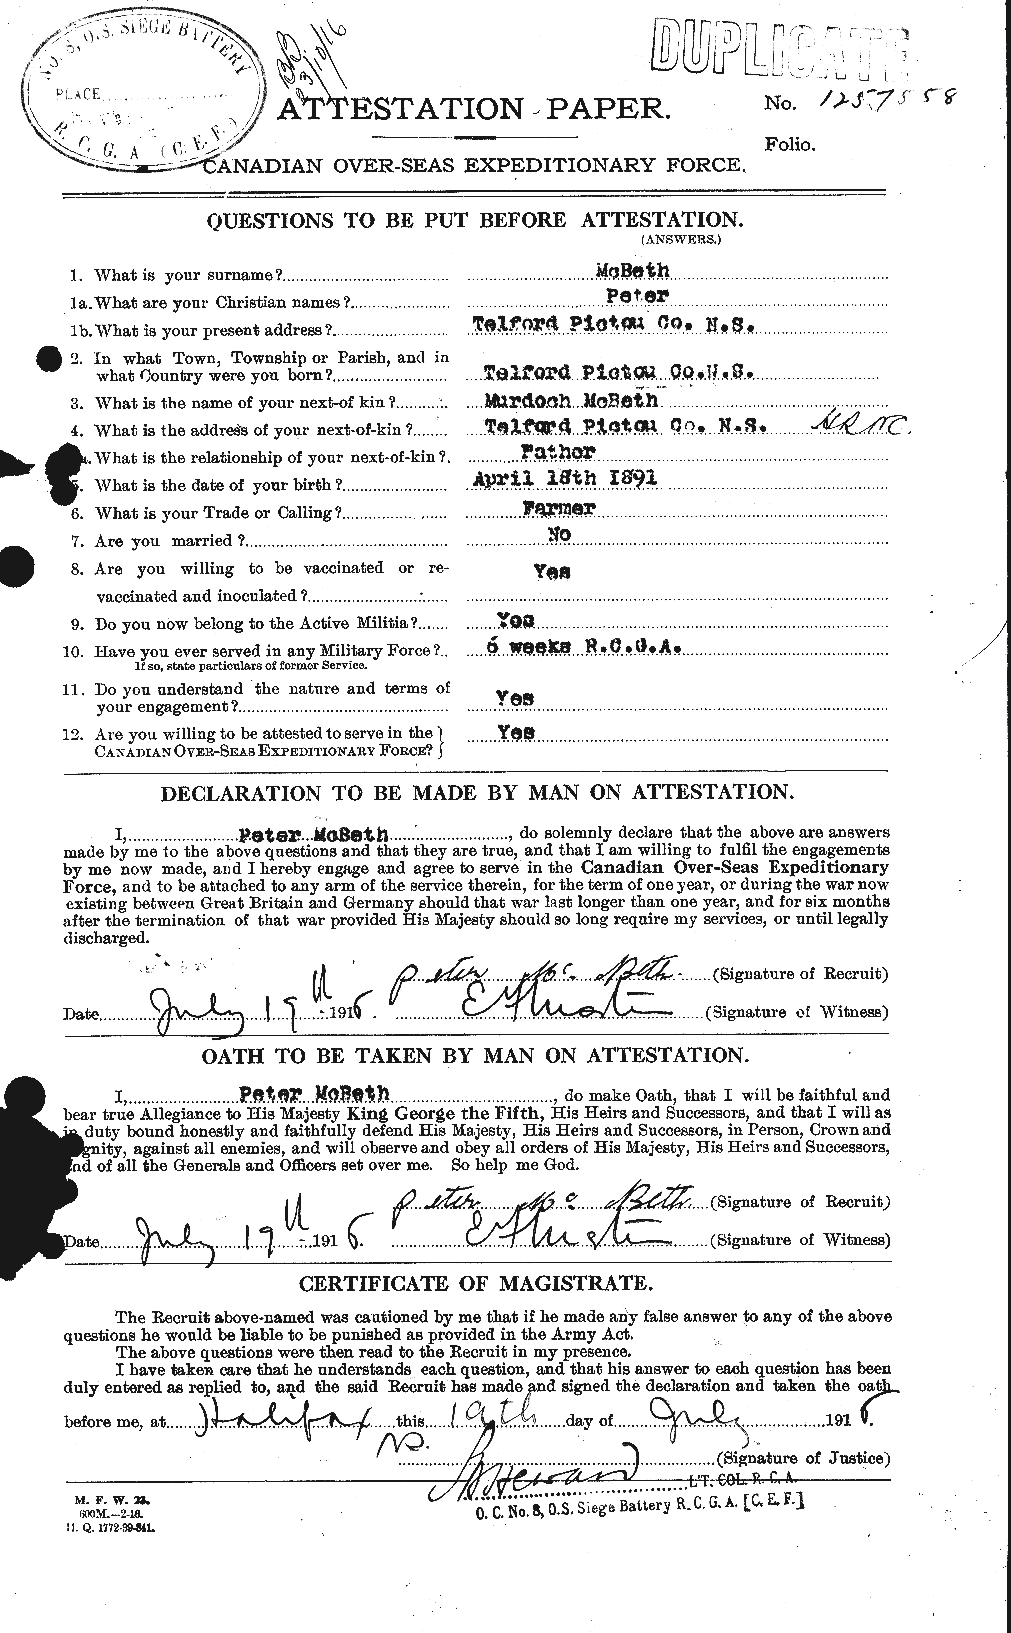 Personnel Records of the First World War - CEF 132104a